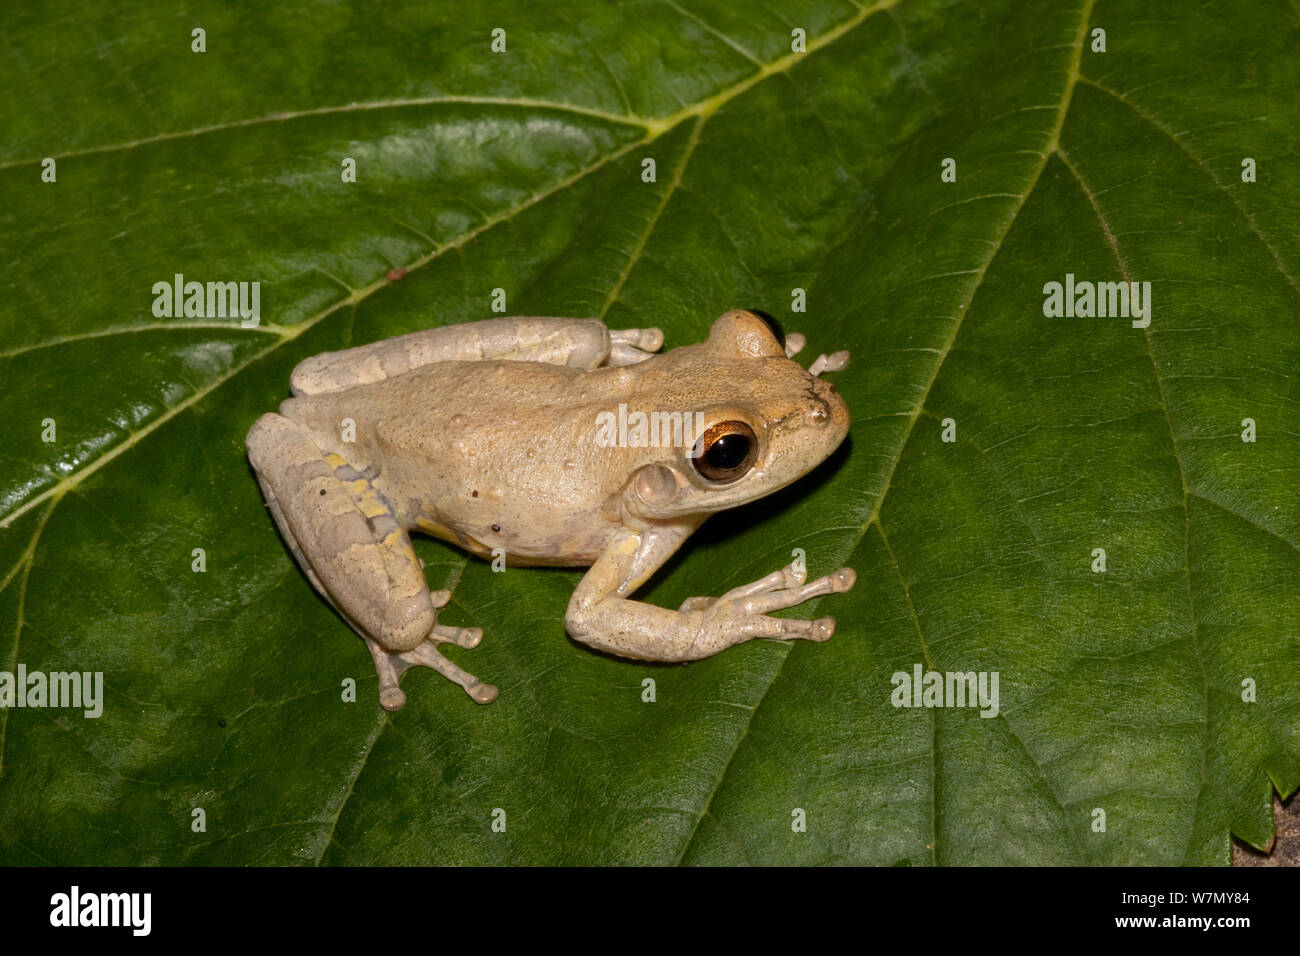 Cuban treefrog (Osteopilus septentrionalis) Lake Kissimmee, South Florida, USA.  Introduced into the USA from the West Indies. Controlled conditions Stock Photo